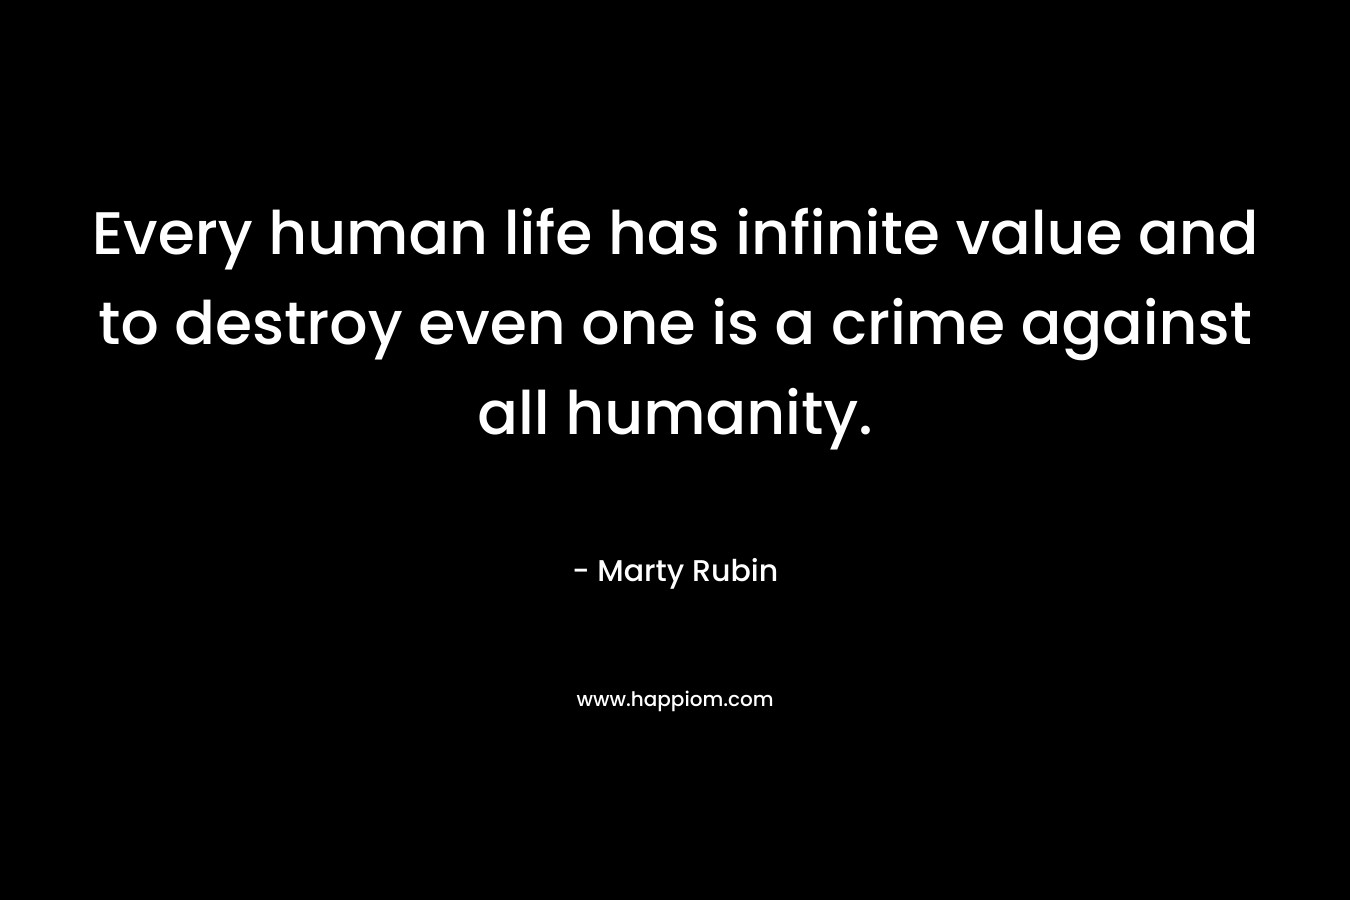 Every human life has infinite value and to destroy even one is a crime against all humanity. – Marty Rubin